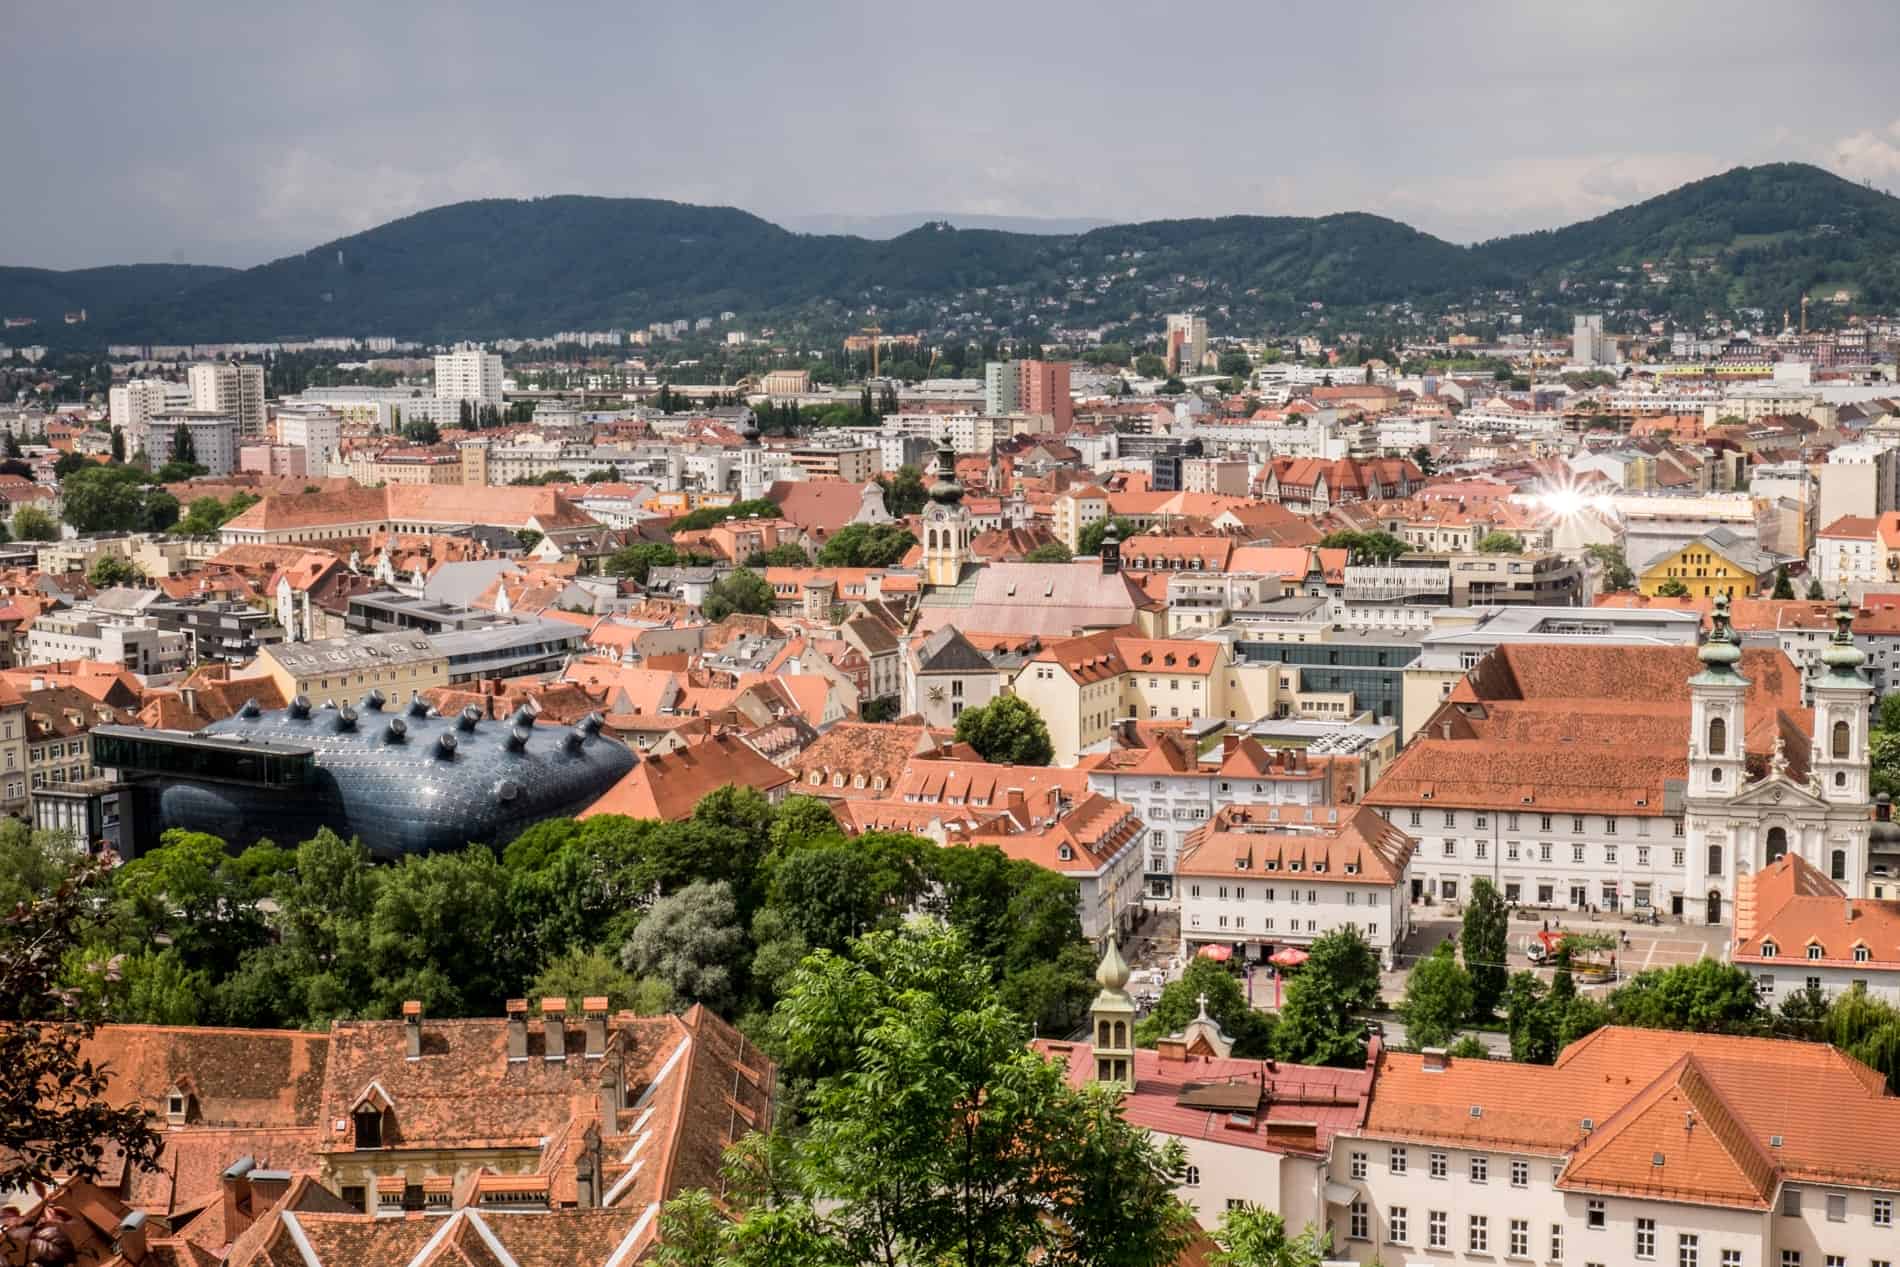 Elevated view of Graz city overlooking the red rooftops and the blue alien looking museum building.